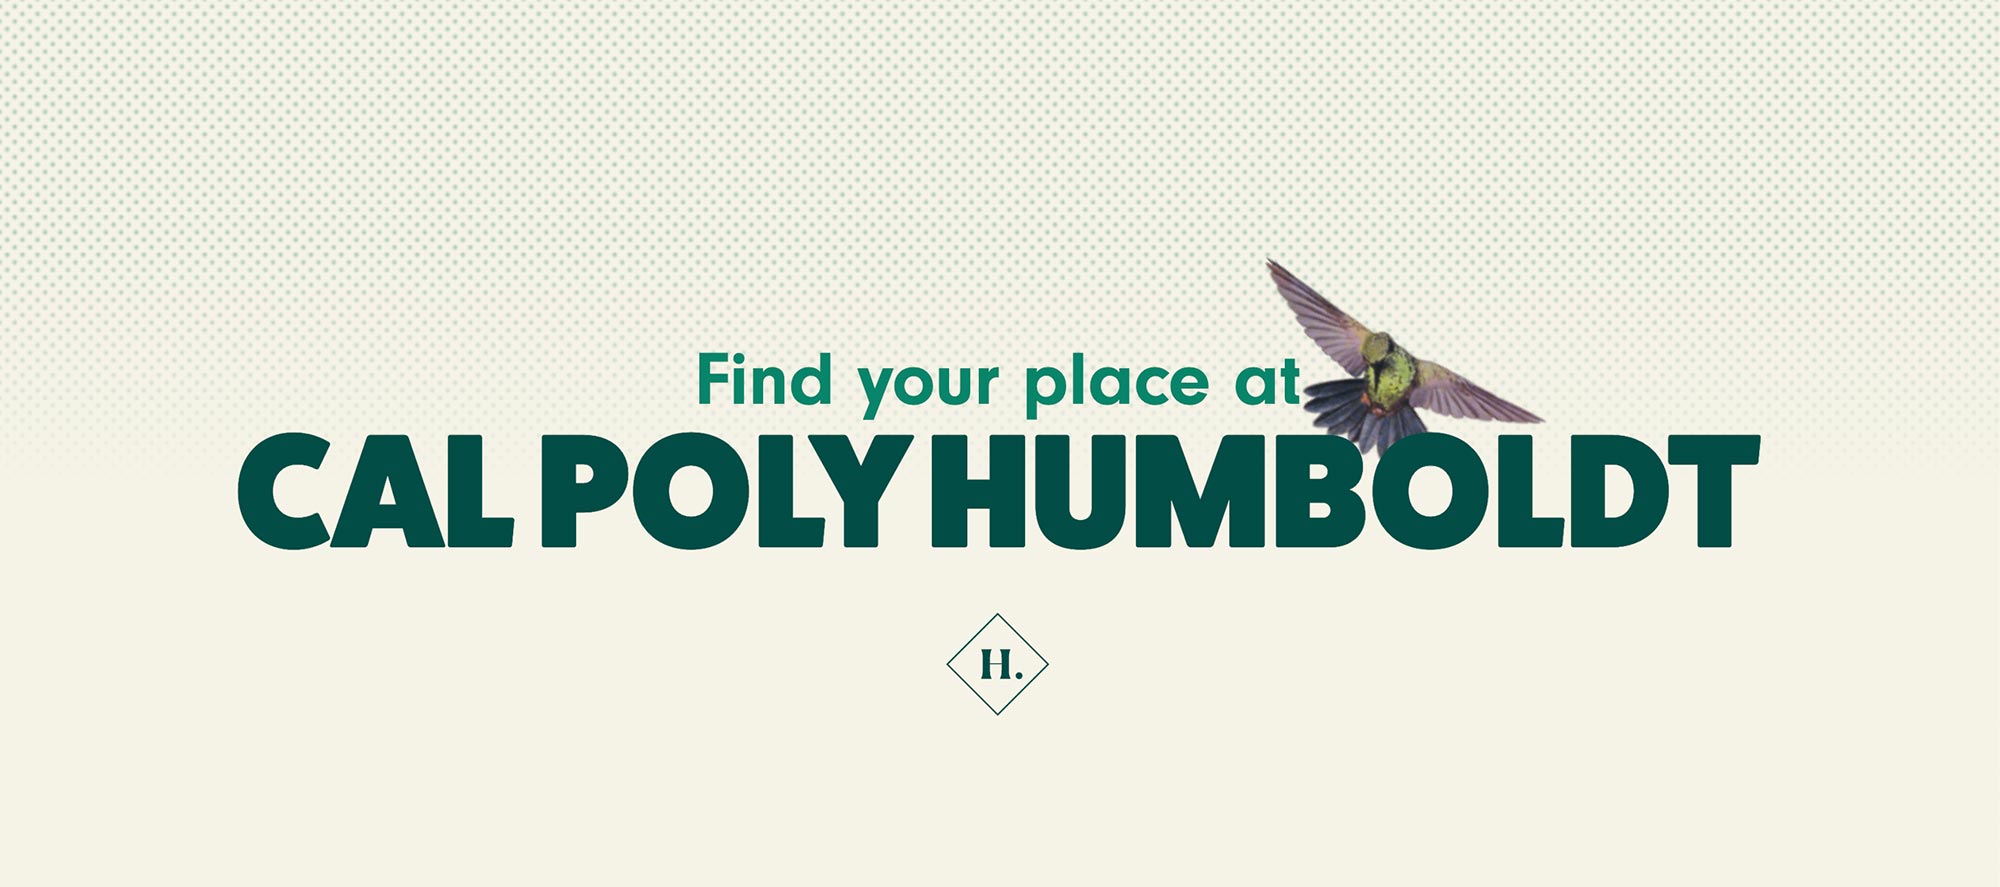 Find Your Place at Cal Poly Humboldt